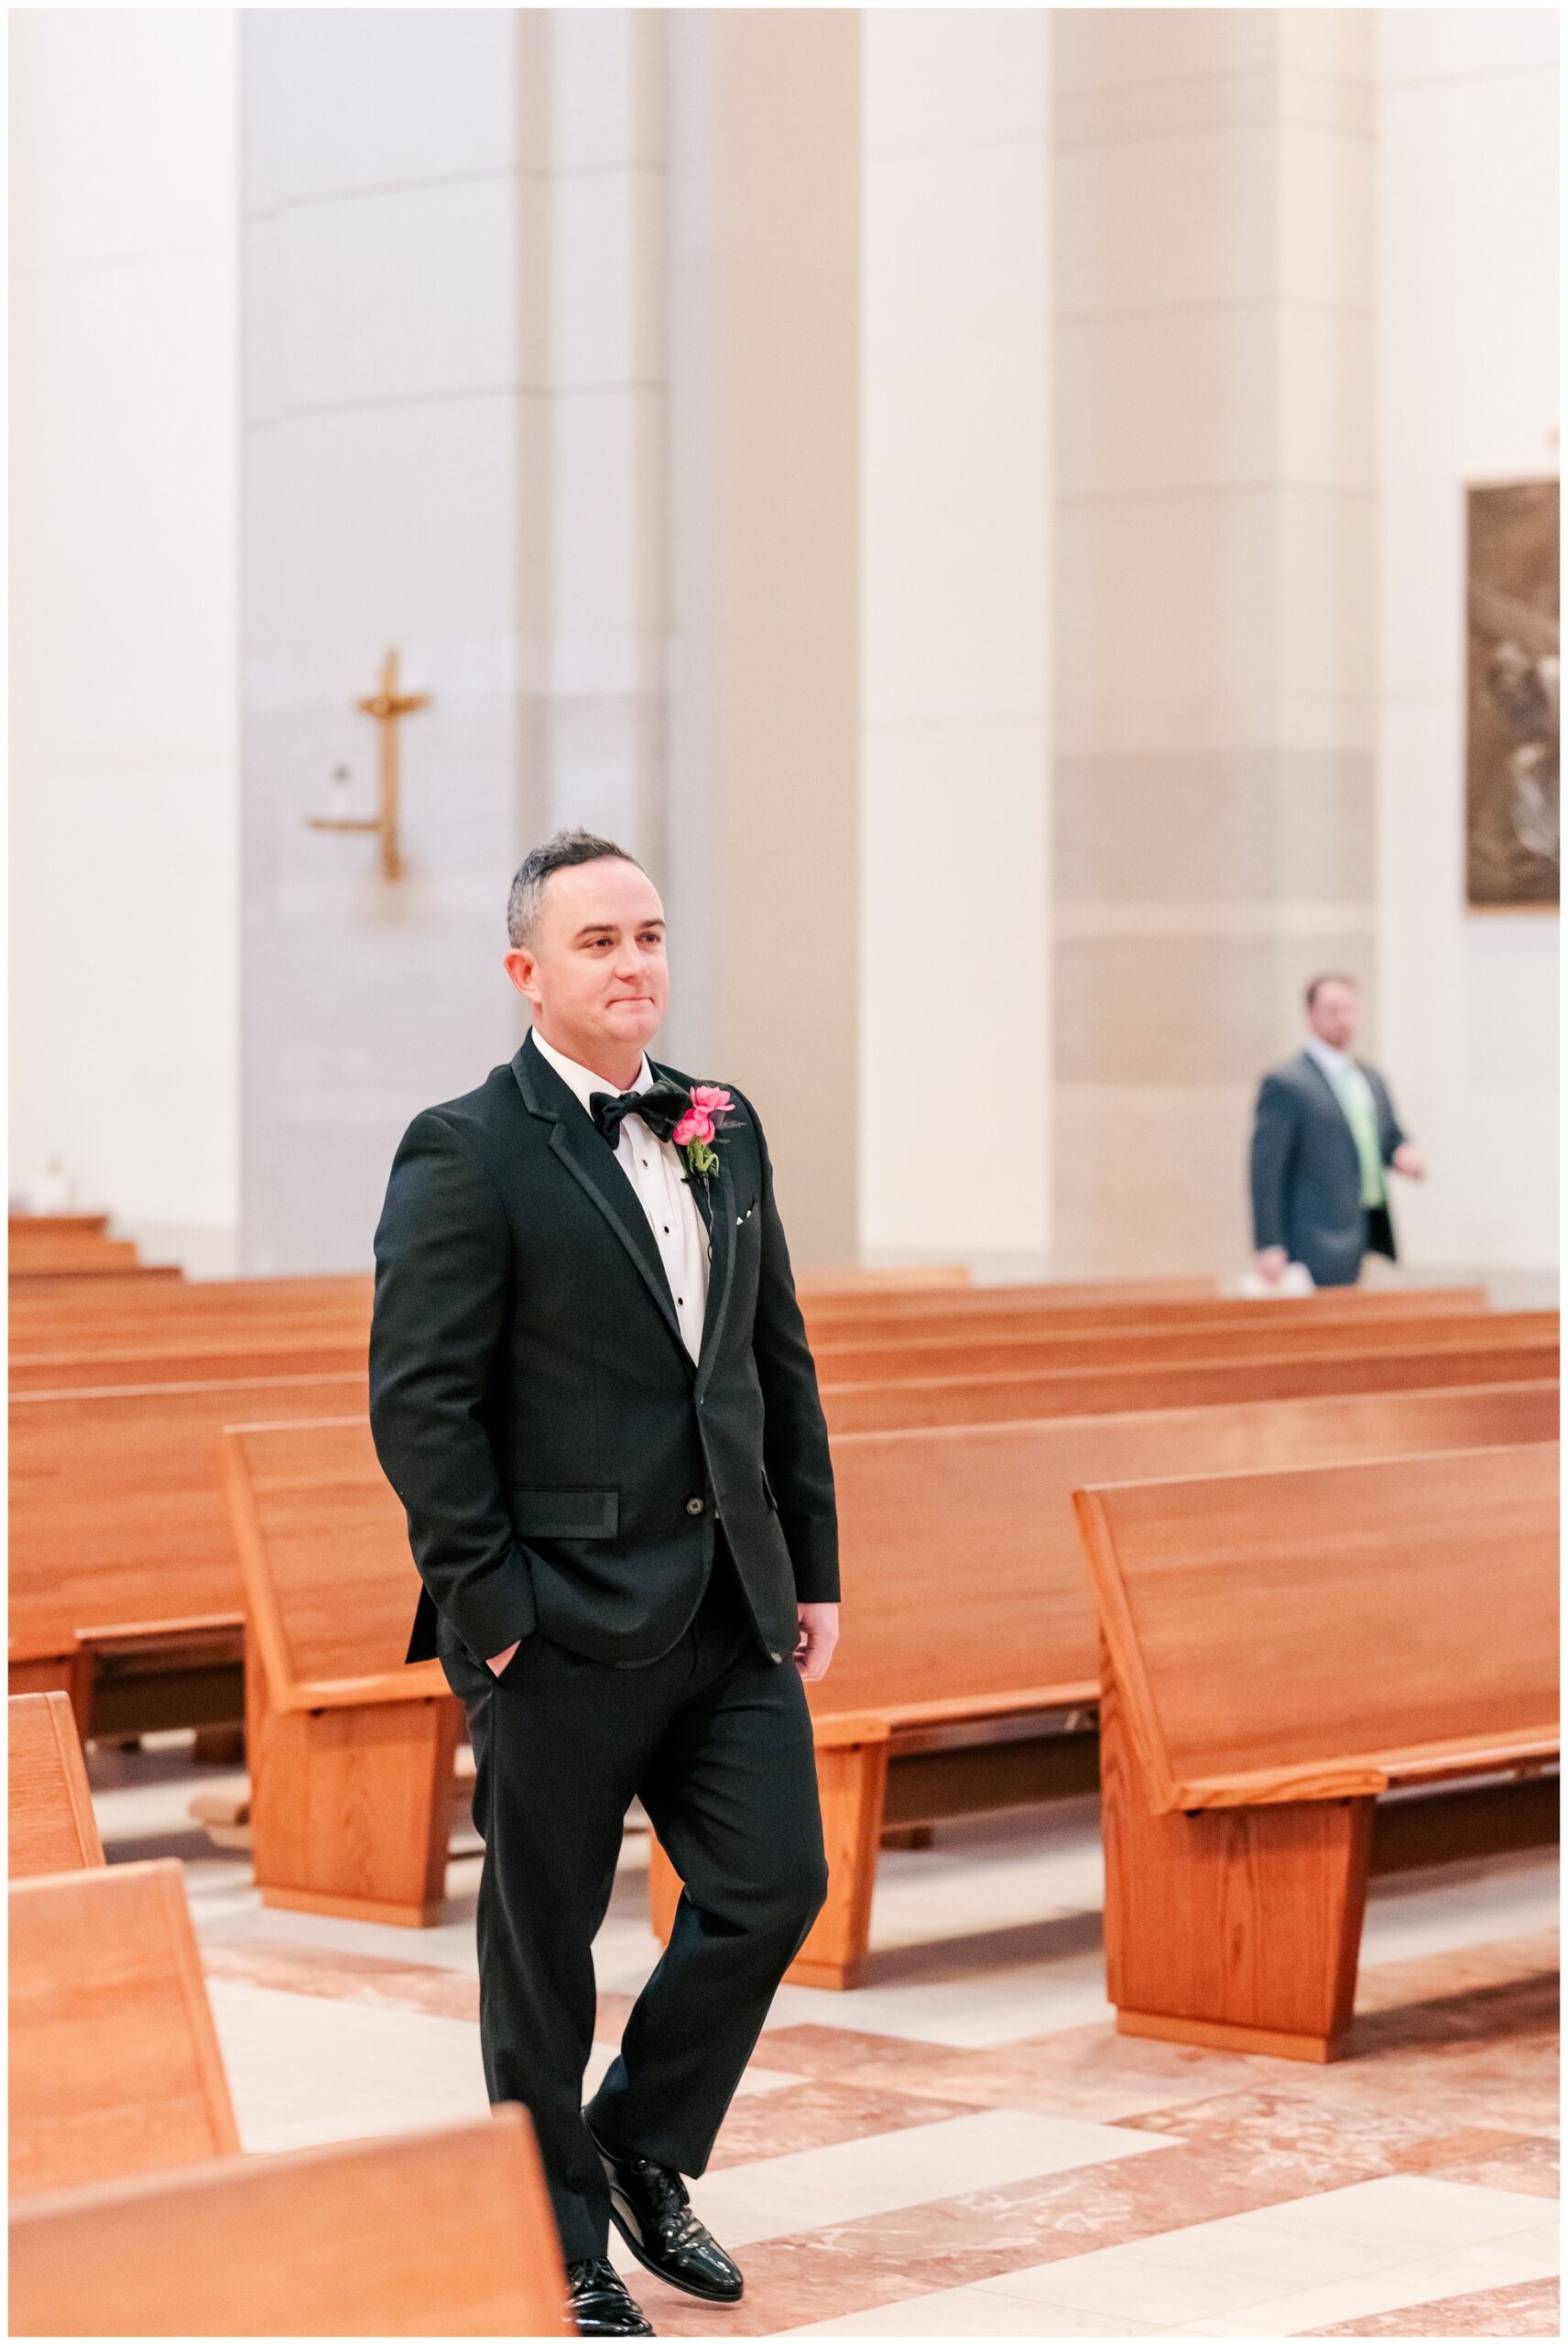 Groom walks down the aisle to his wedding at the Co Cathedral of the Sacred Heart in Houston.